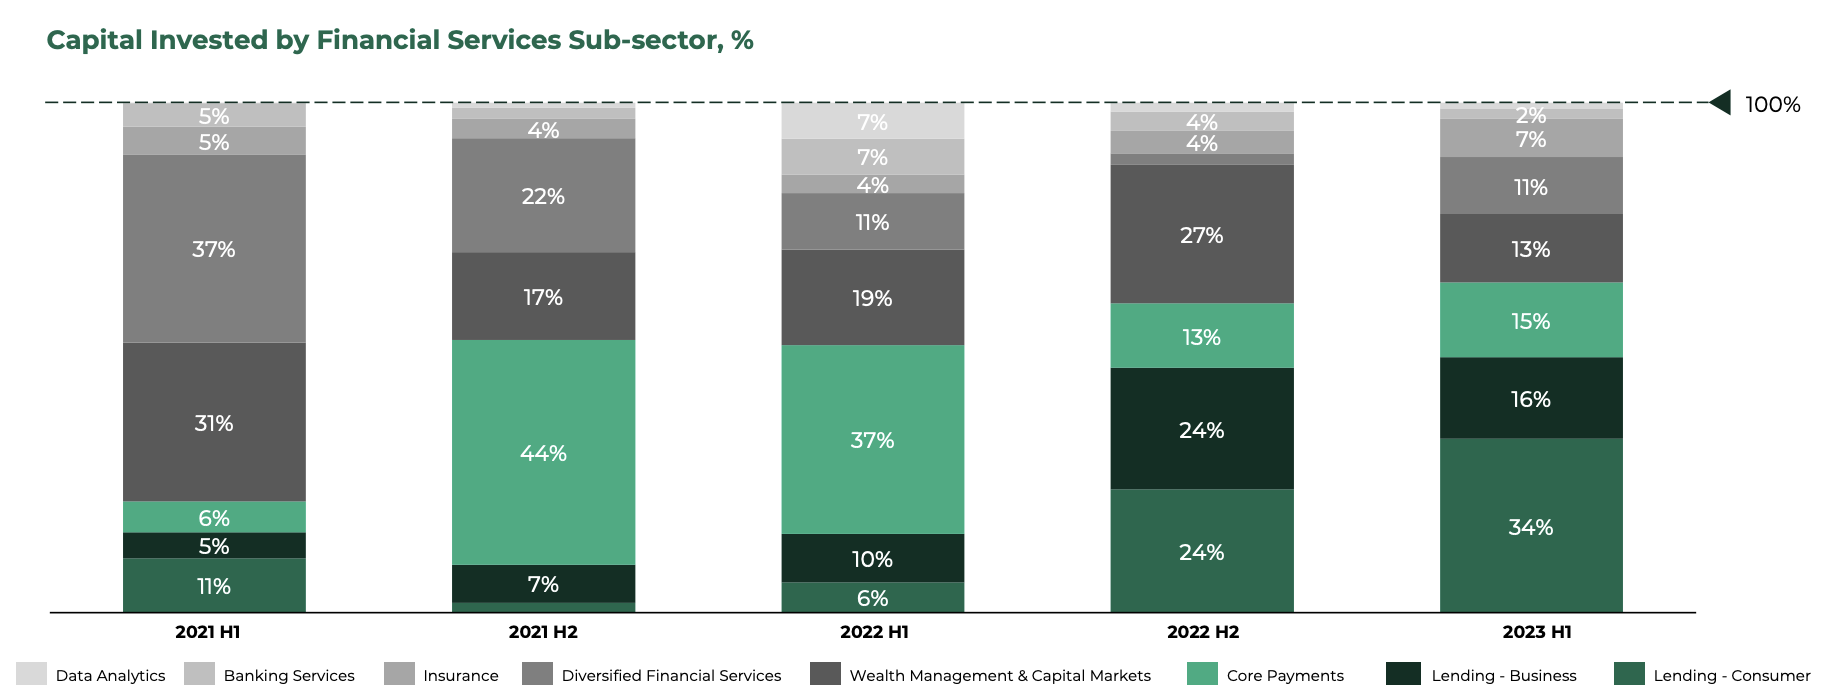 Capital invested by financial services sub-sector, %, Source: Southeast Asia Tech Investment 2023 H1, Cento Ventures, Dec 2023